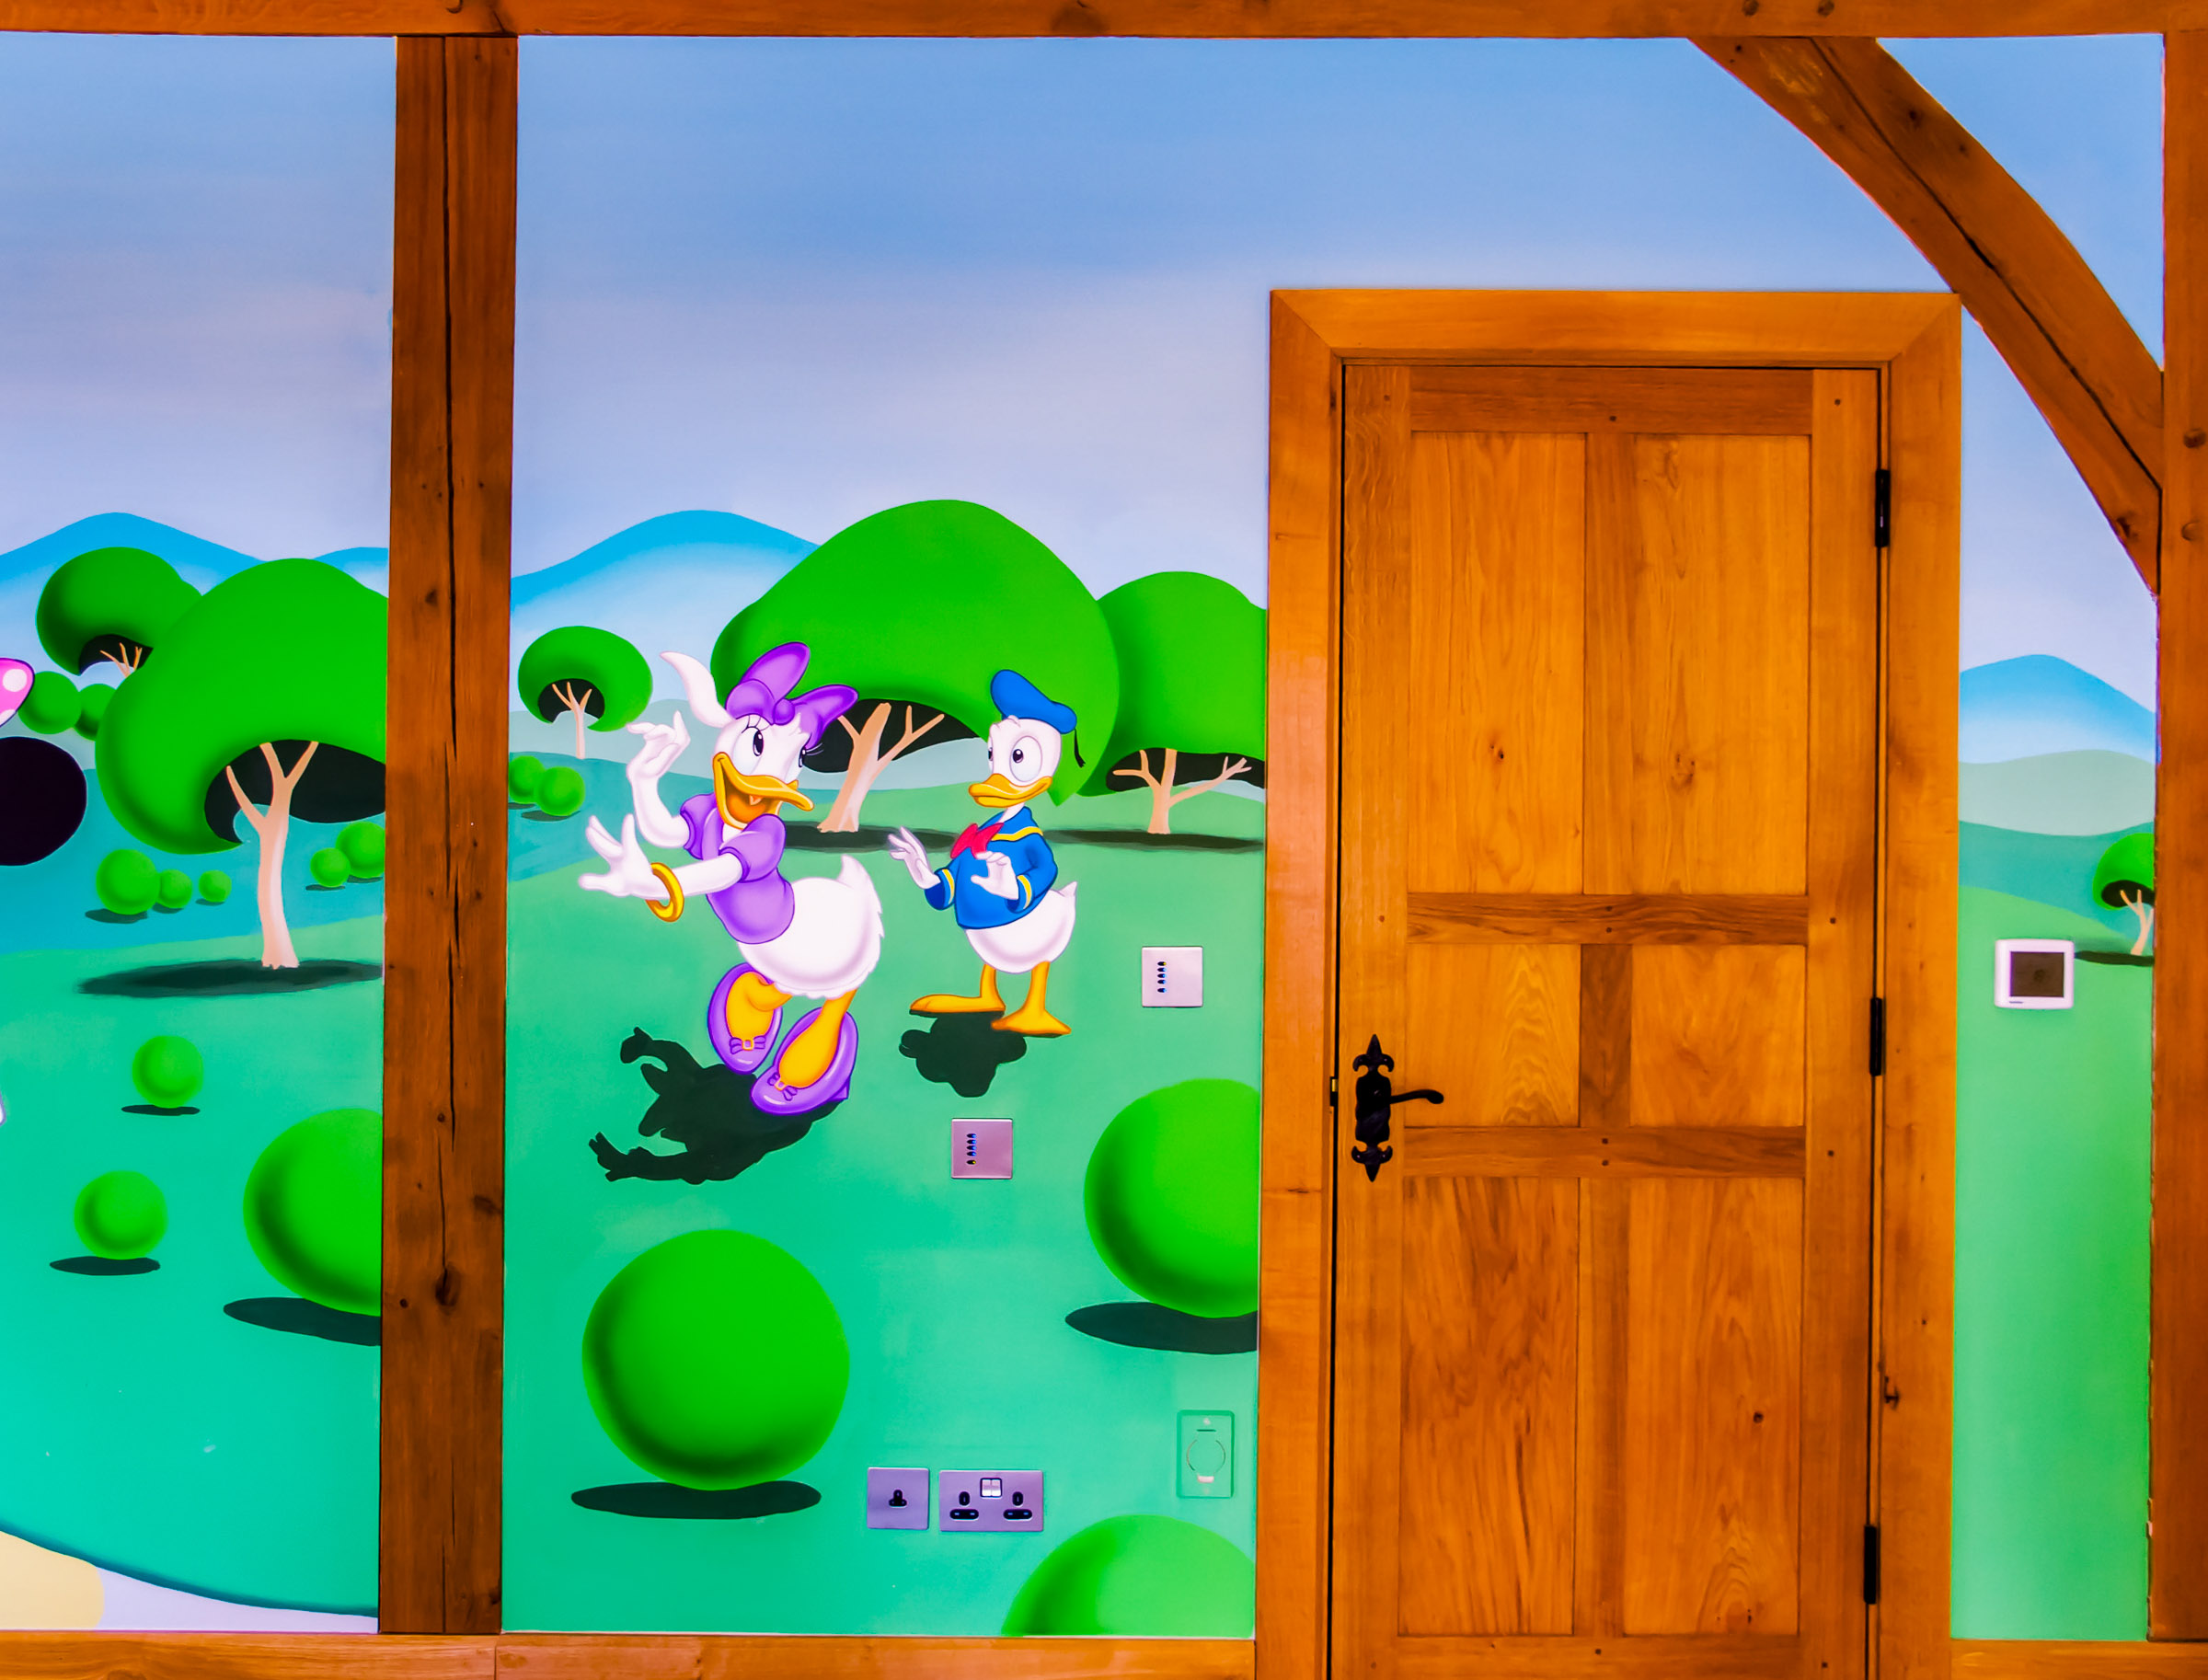 Donald Duck and Daisy Duck in the right hand side of the mural, hand-painted around the door and exposed beams